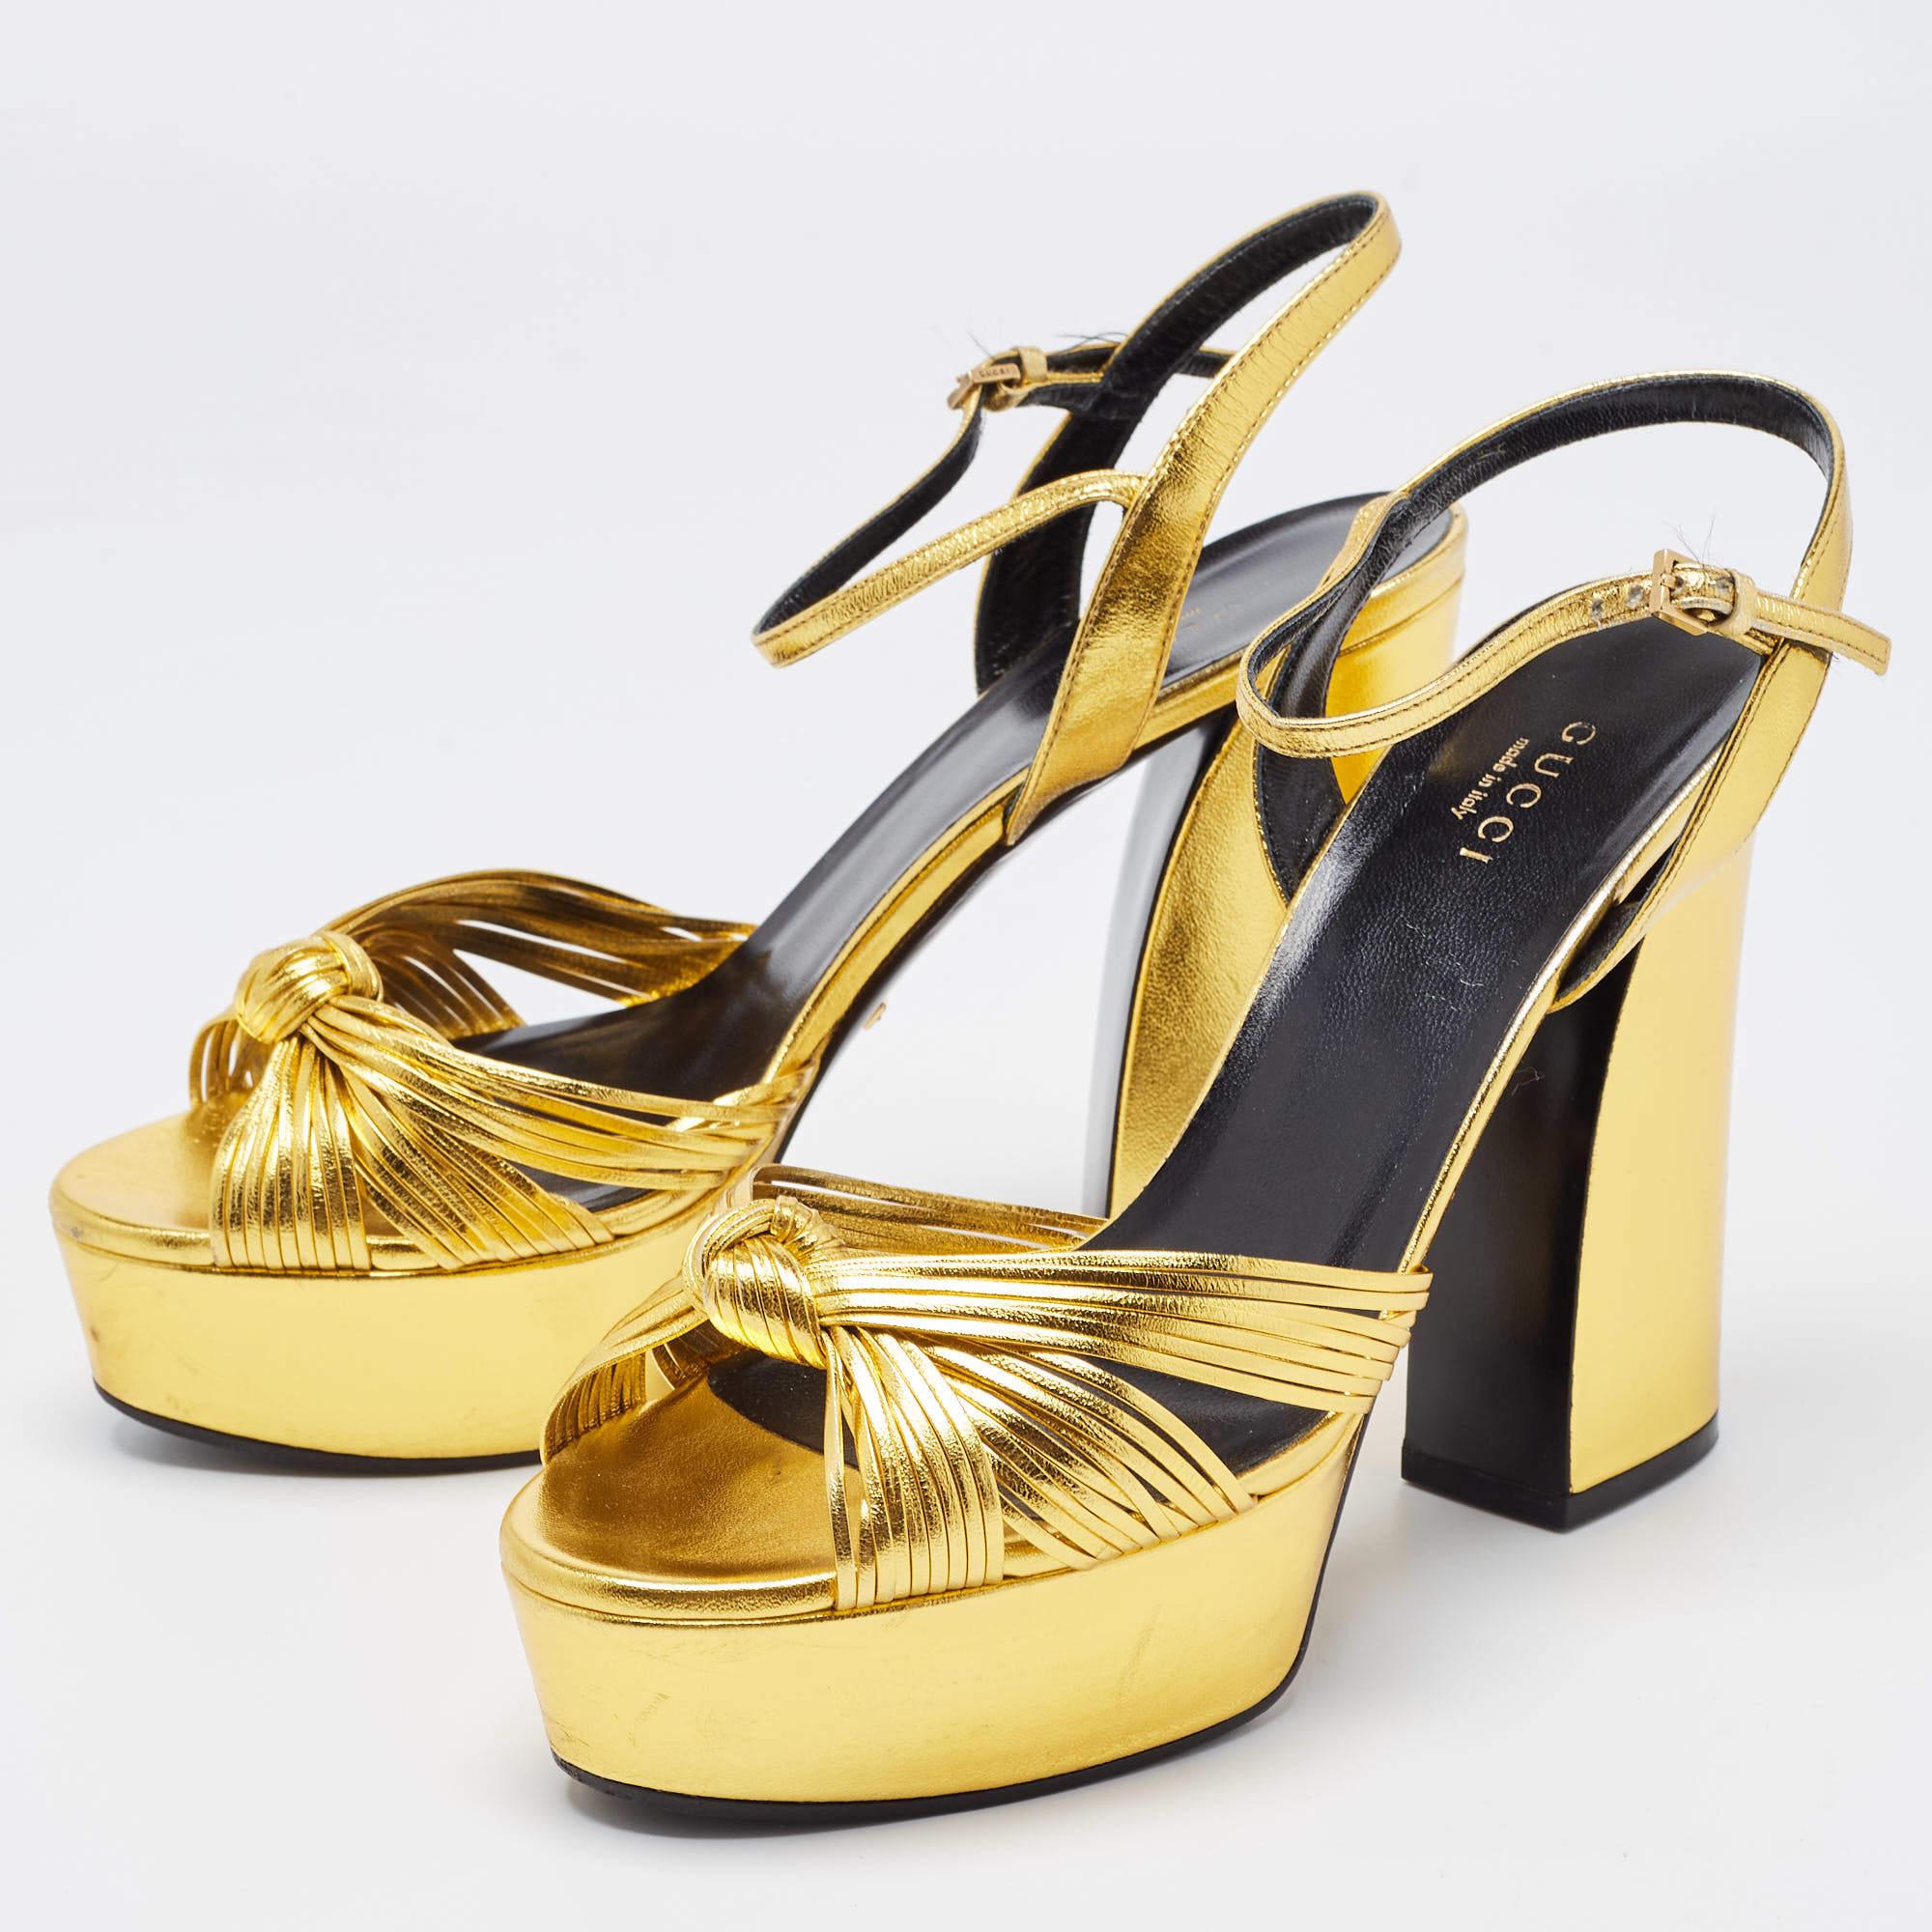 Gucci Gold Leather Allie Knotted Platform Ankle Strap Sandals Size 38 5